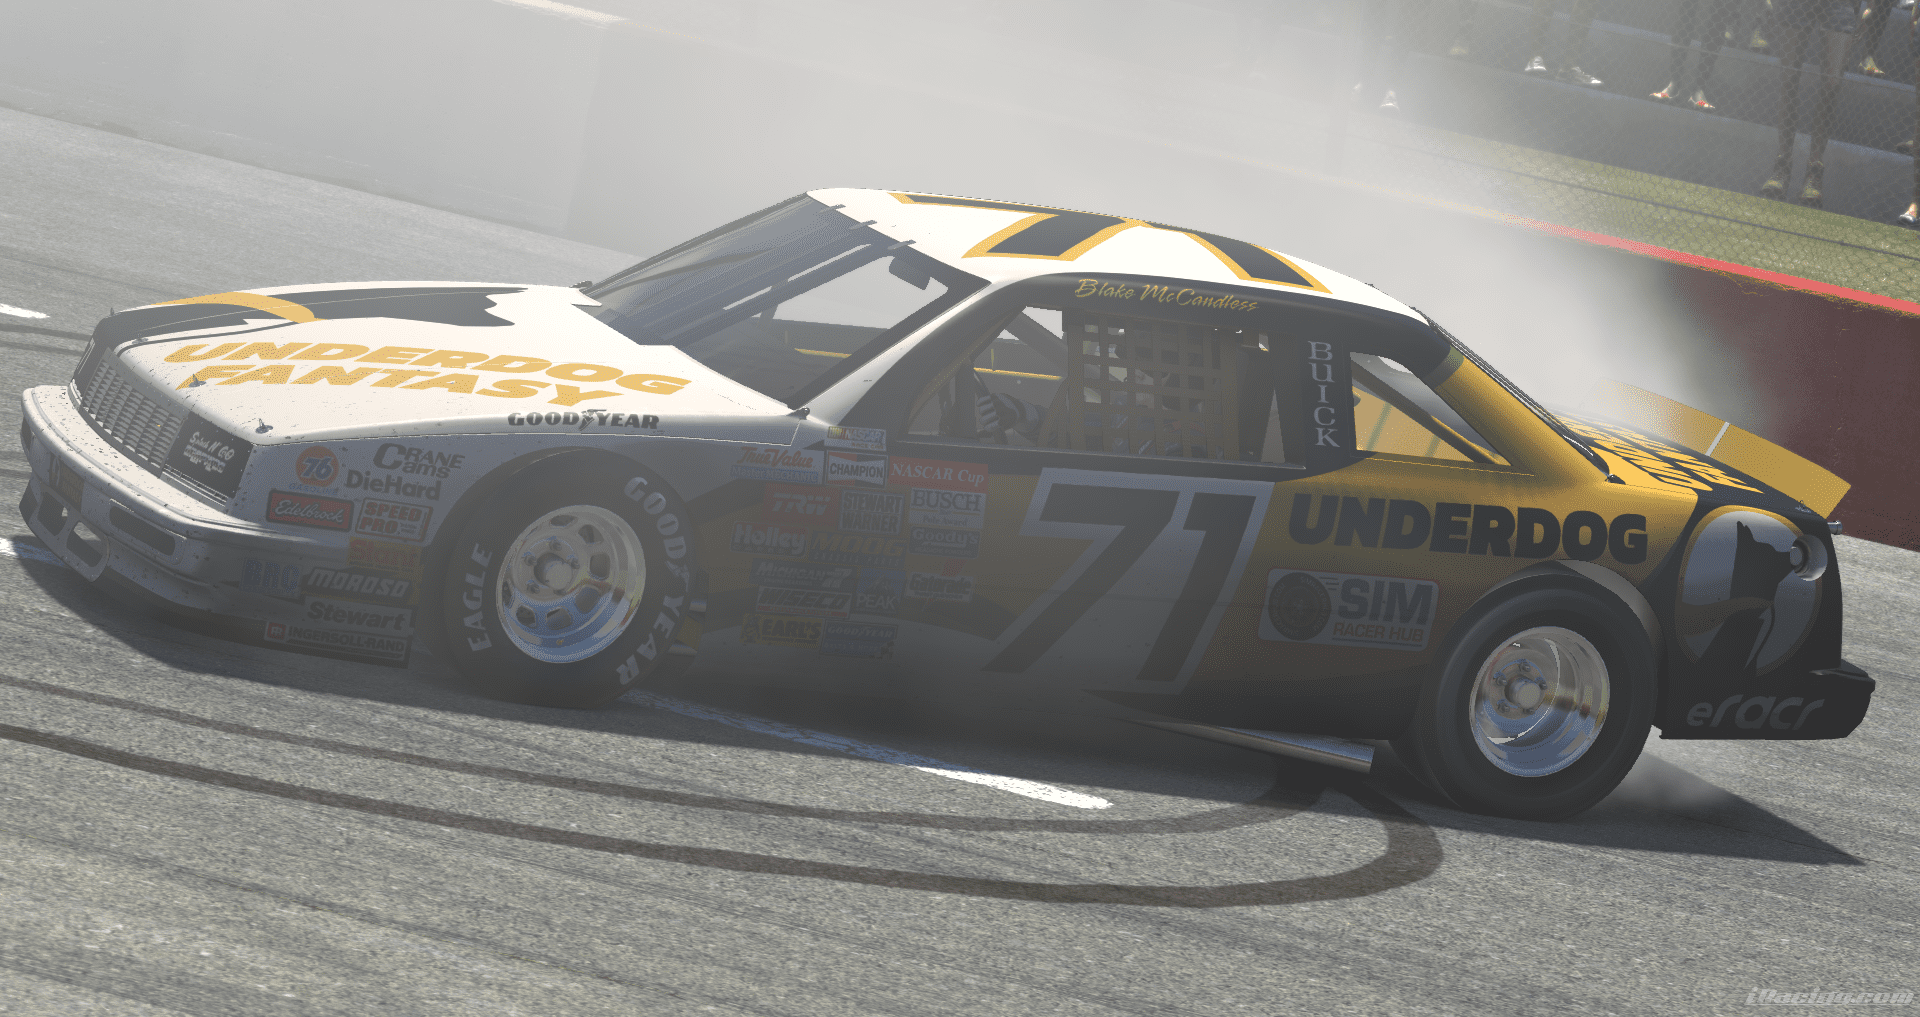 Blake McCandless took the victory at North Wilkesboro Speedway in one of the most difficult cars on the iRacing service.